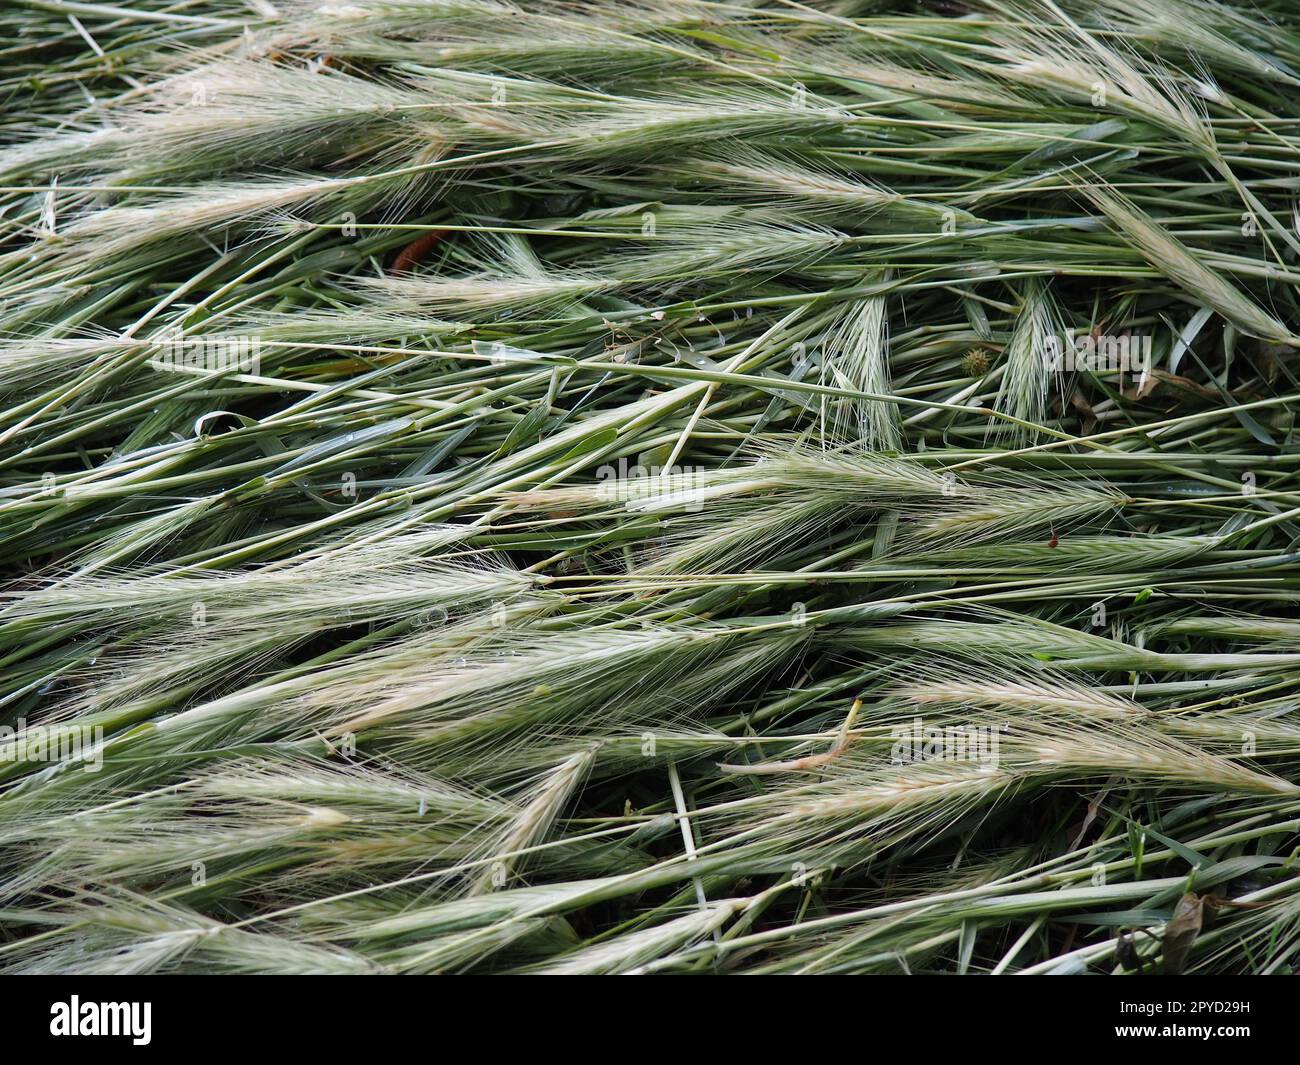 Ears of ripe wheat or cereal plant. Seeds on the stem and ear. Natural calm background. Loss of wheat crop, many ears of ripe grains lie on the ground after wind and rain. Rustic lifestyle theme Stock Photo